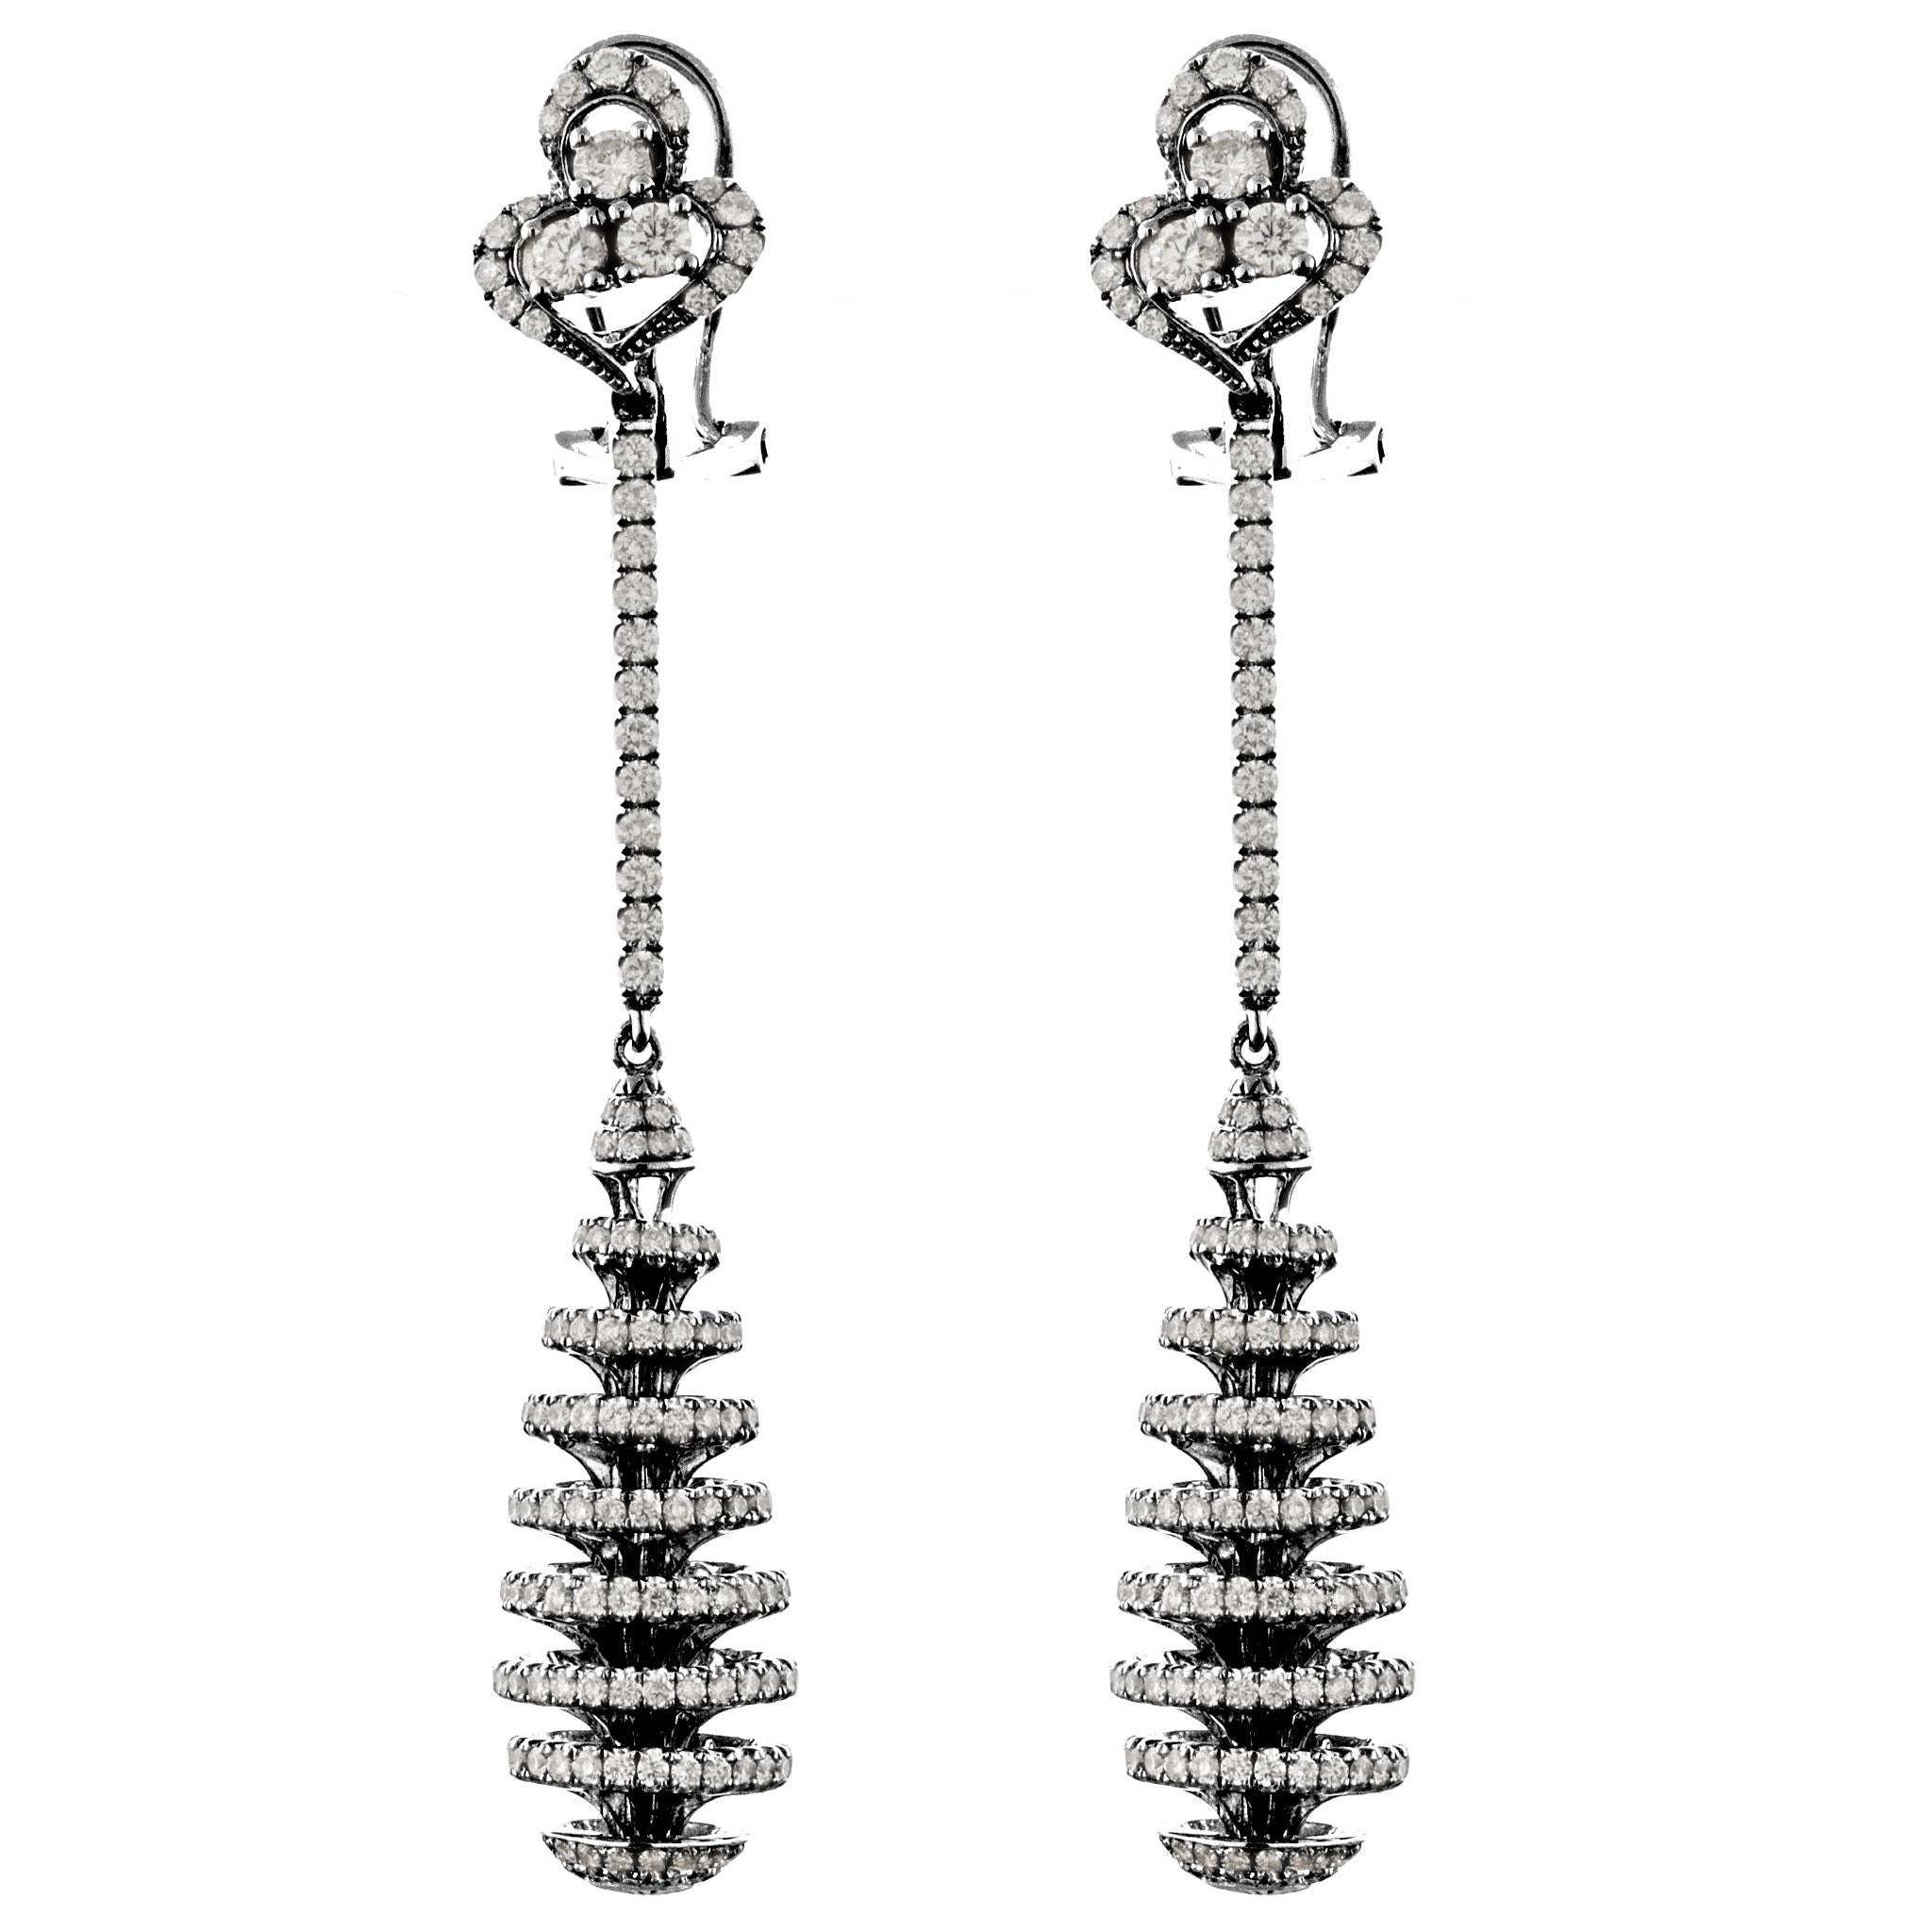 A unique and stylish pair of earrings featuring spirals of bright white diamonds that drop and dance on the ear. There are a total of 4.22 carats of round brilliant-cut diamonds around the piece, giving it excellent sparkle and brilliance as it